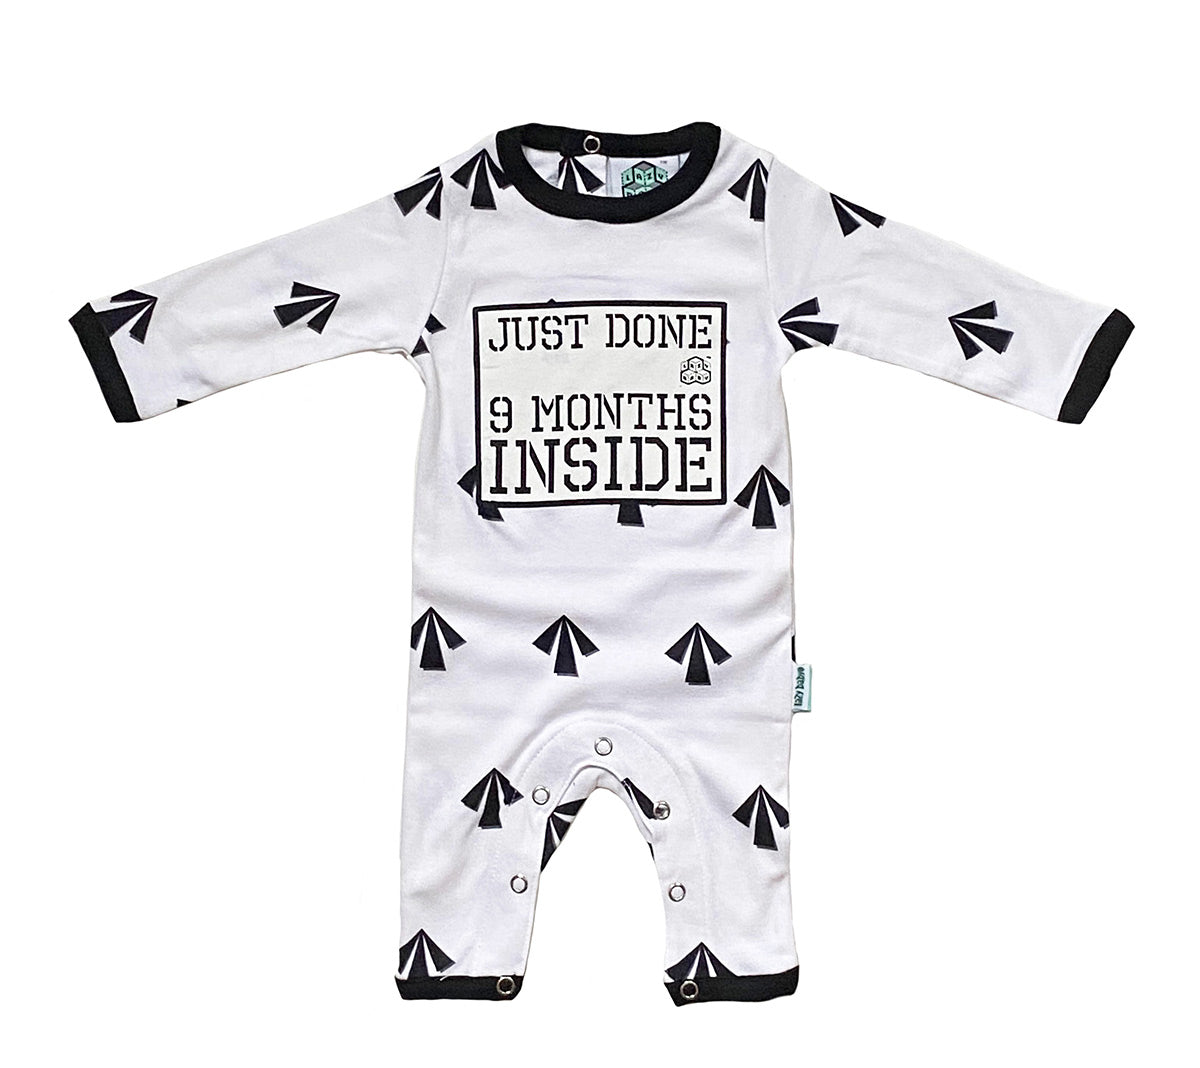 New Born Baby Grow -Just Done 9 Months Inside® Arrows - Baby Shower Gift - Coming Home Outfit by Lazy Baby®